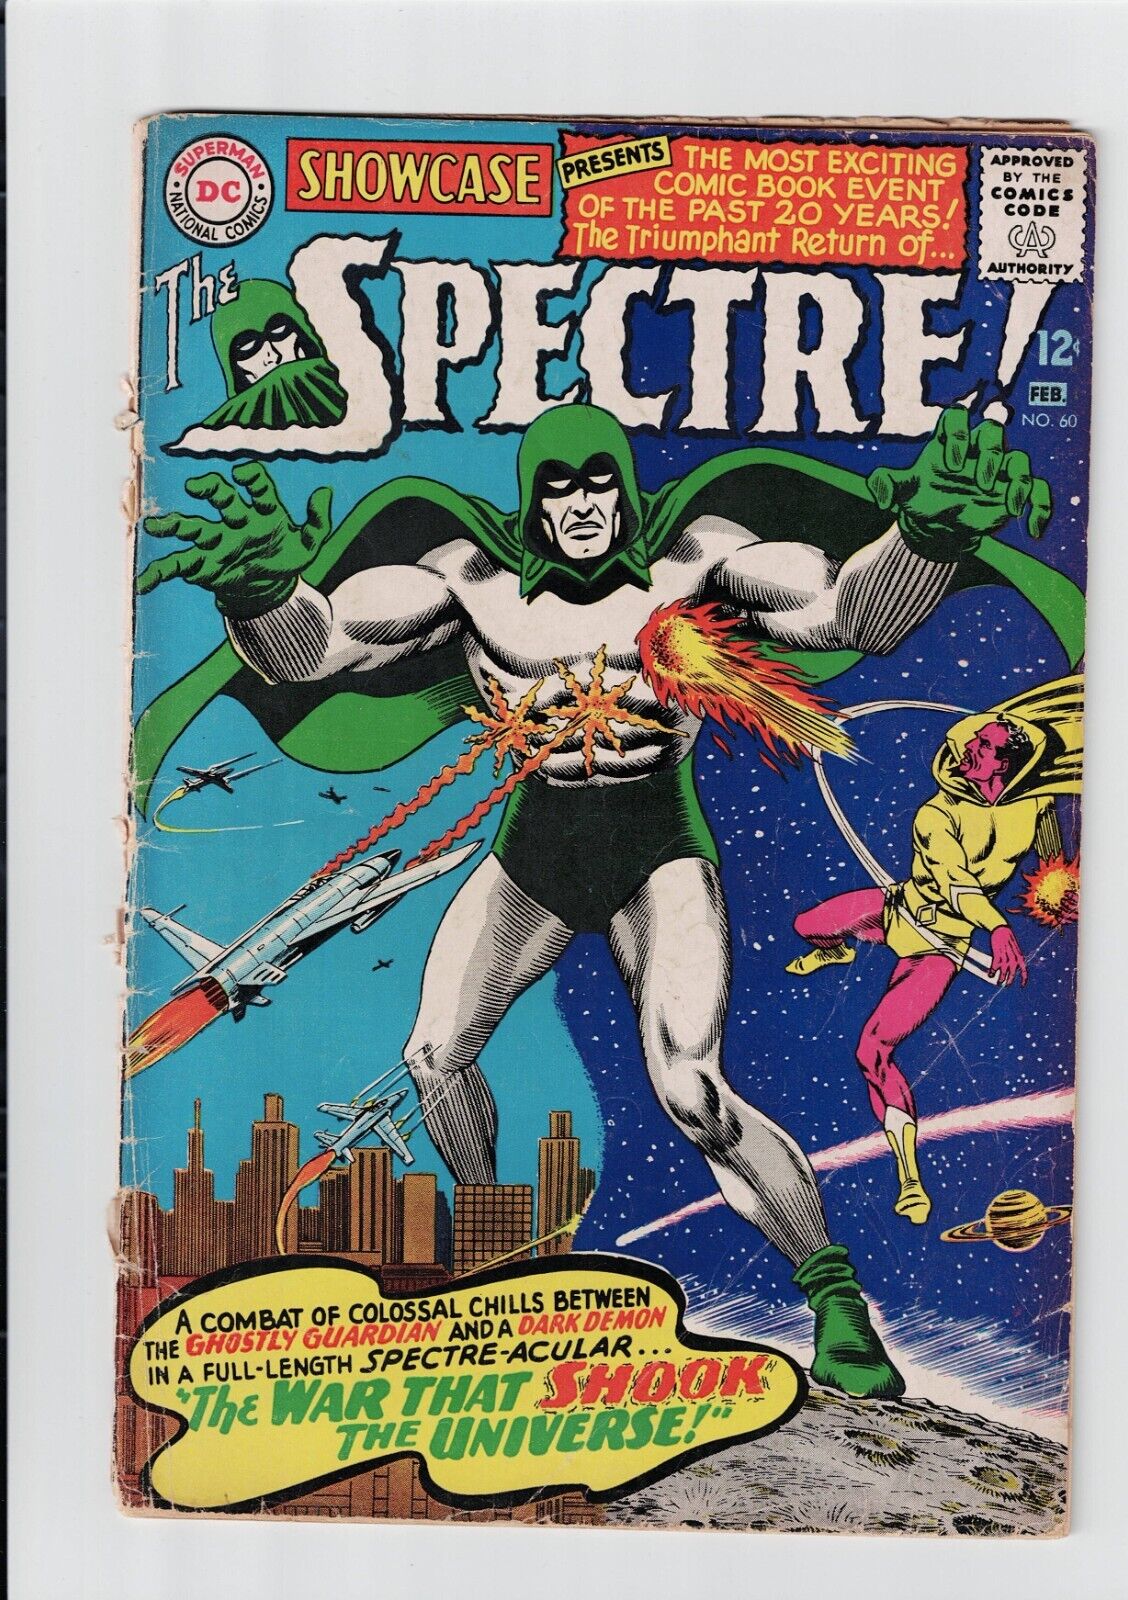 Spectre Mini-Lot Showcase #60 - First appearance of Silver Age Spectre